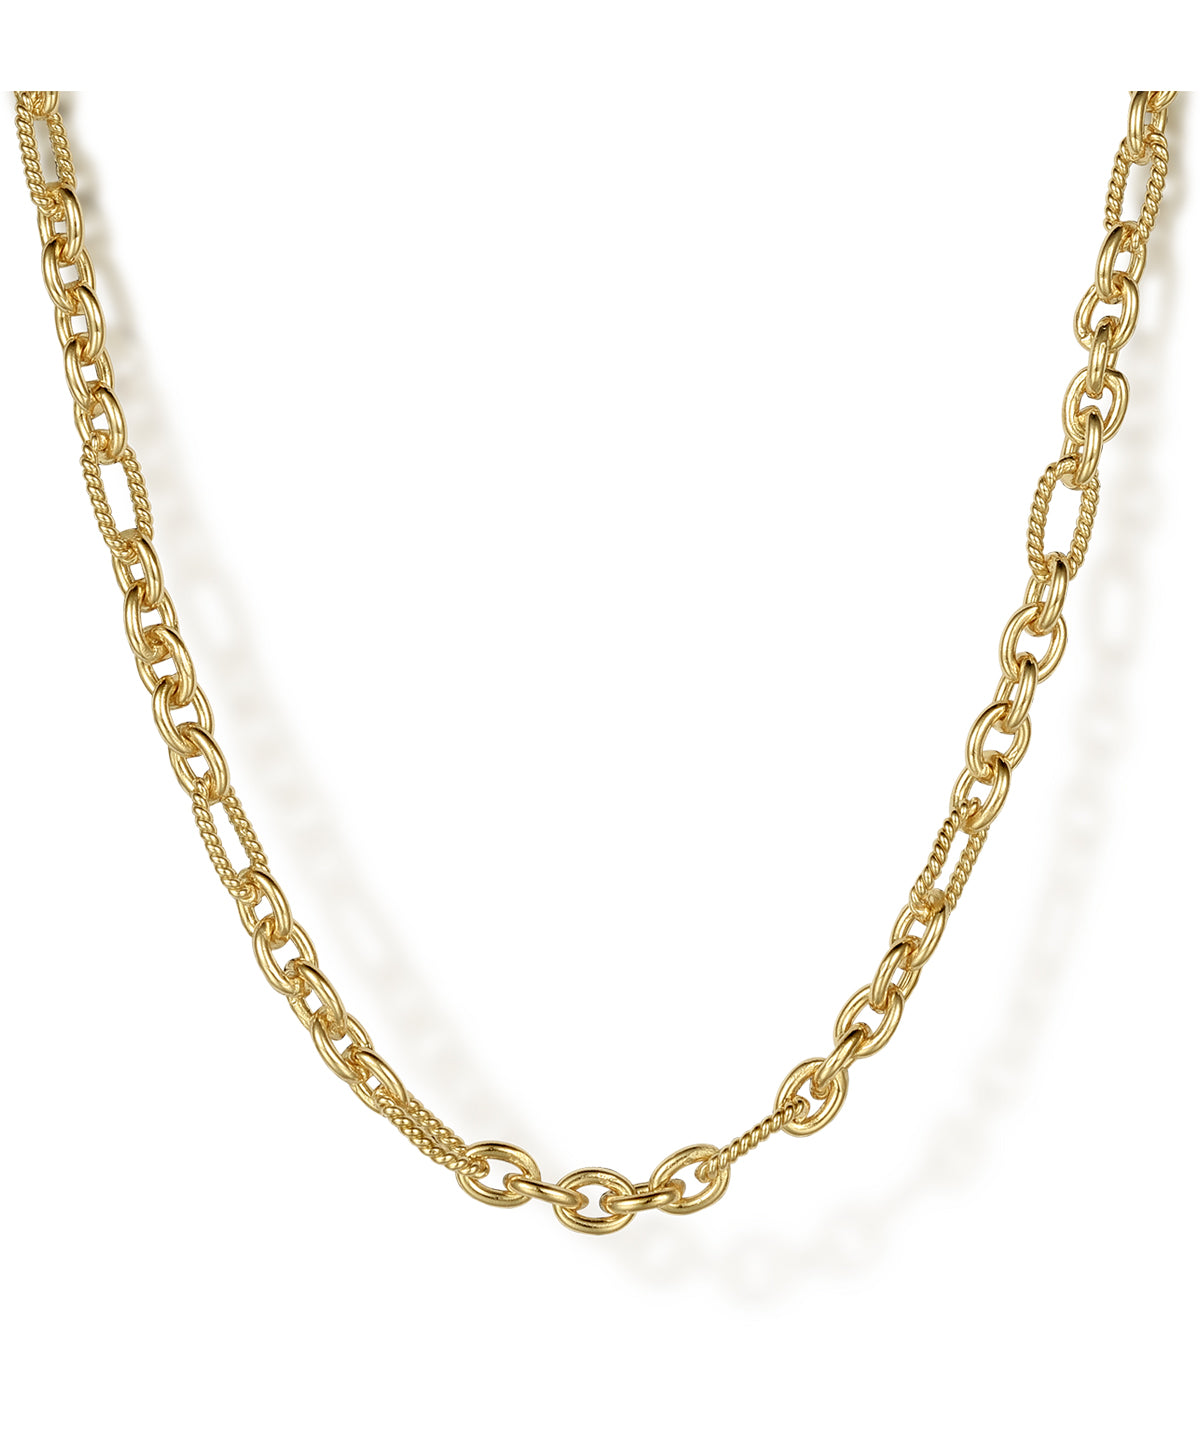 22 inch 14K Yellow Gold Necklace